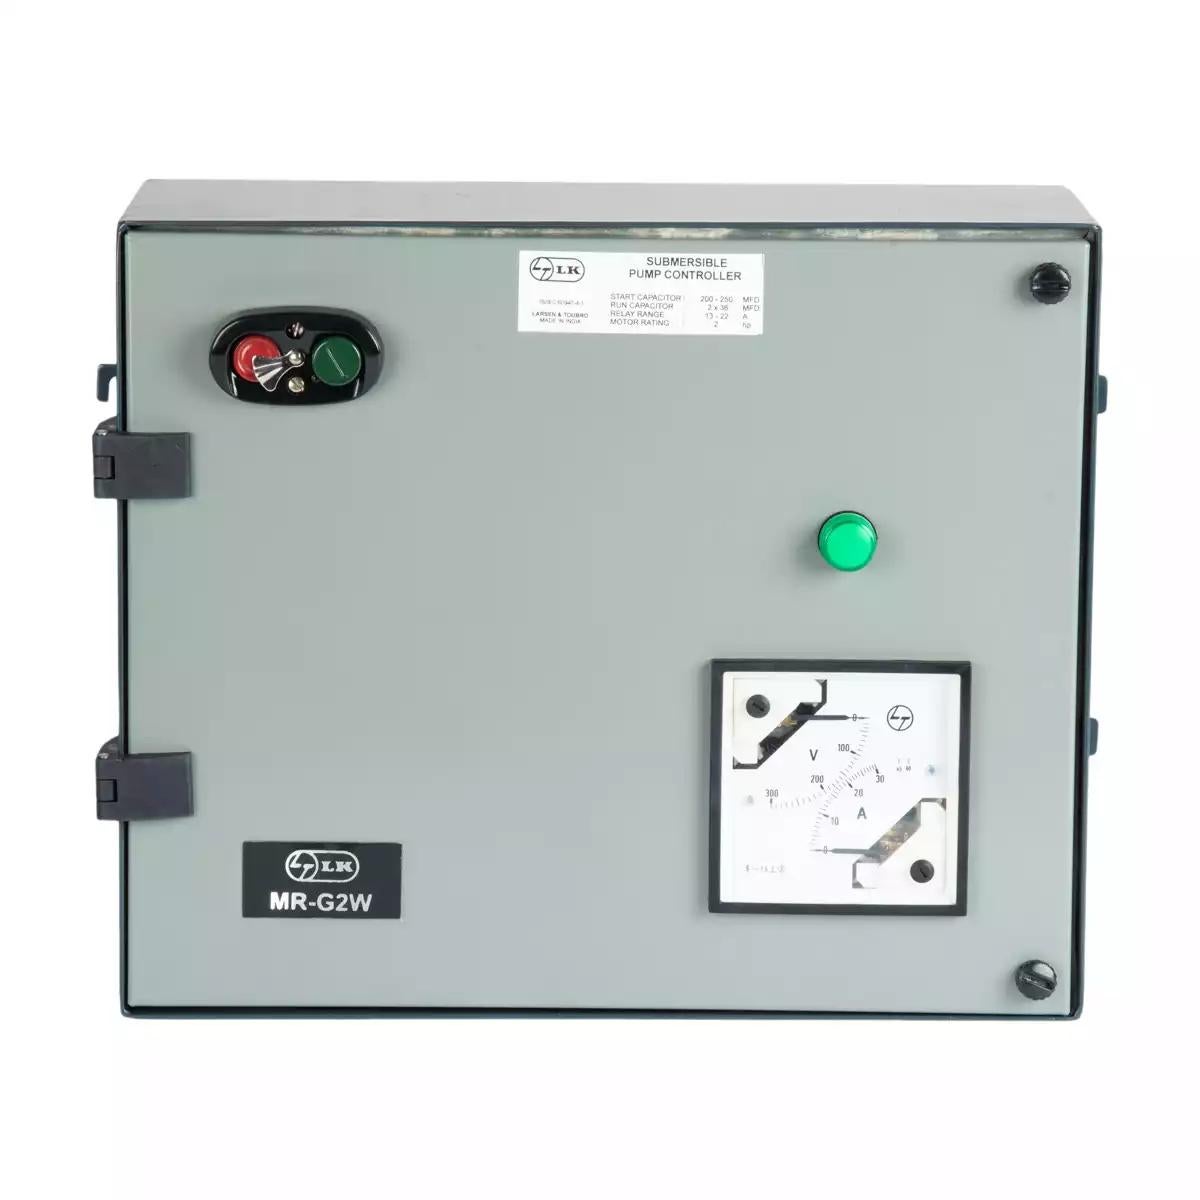 Single Phase Controller with WLC for Submersible Pump Application,MR-G2W,1.5HP,150 / 200mfd,1 x 50mfd (CS91042BDAG)